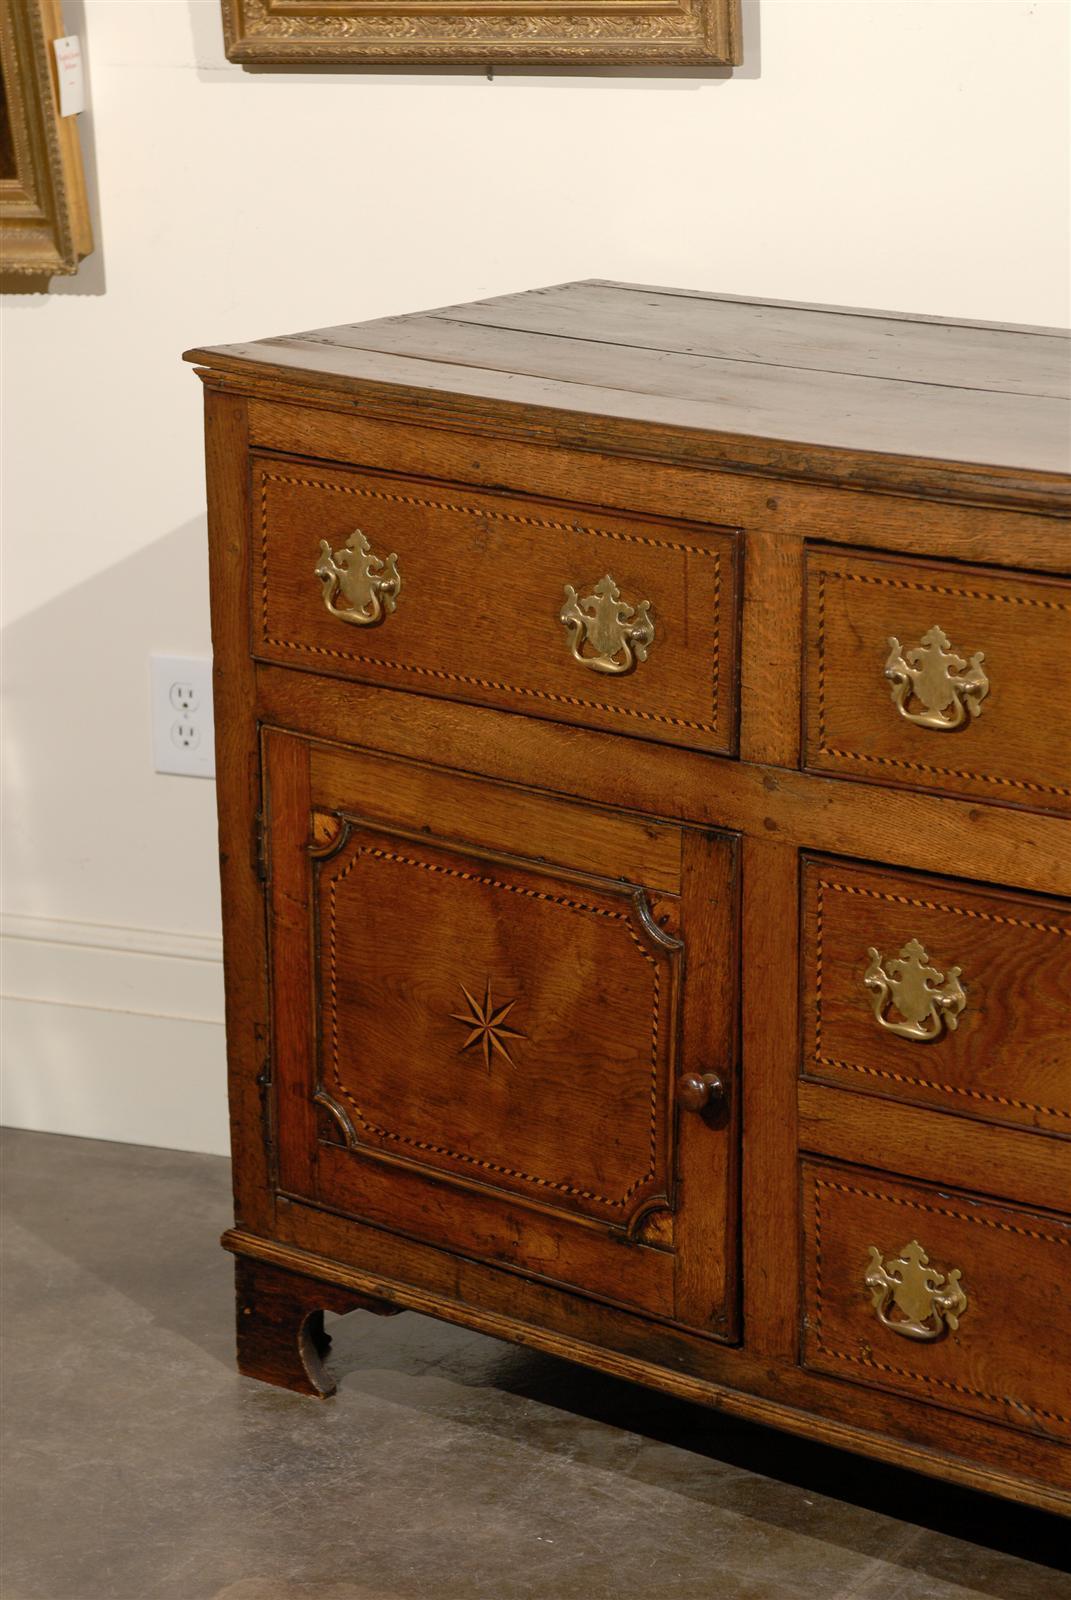 Inlay 1780s English George III Period Oak Server with Inlaid Decor, Doors and Drawers